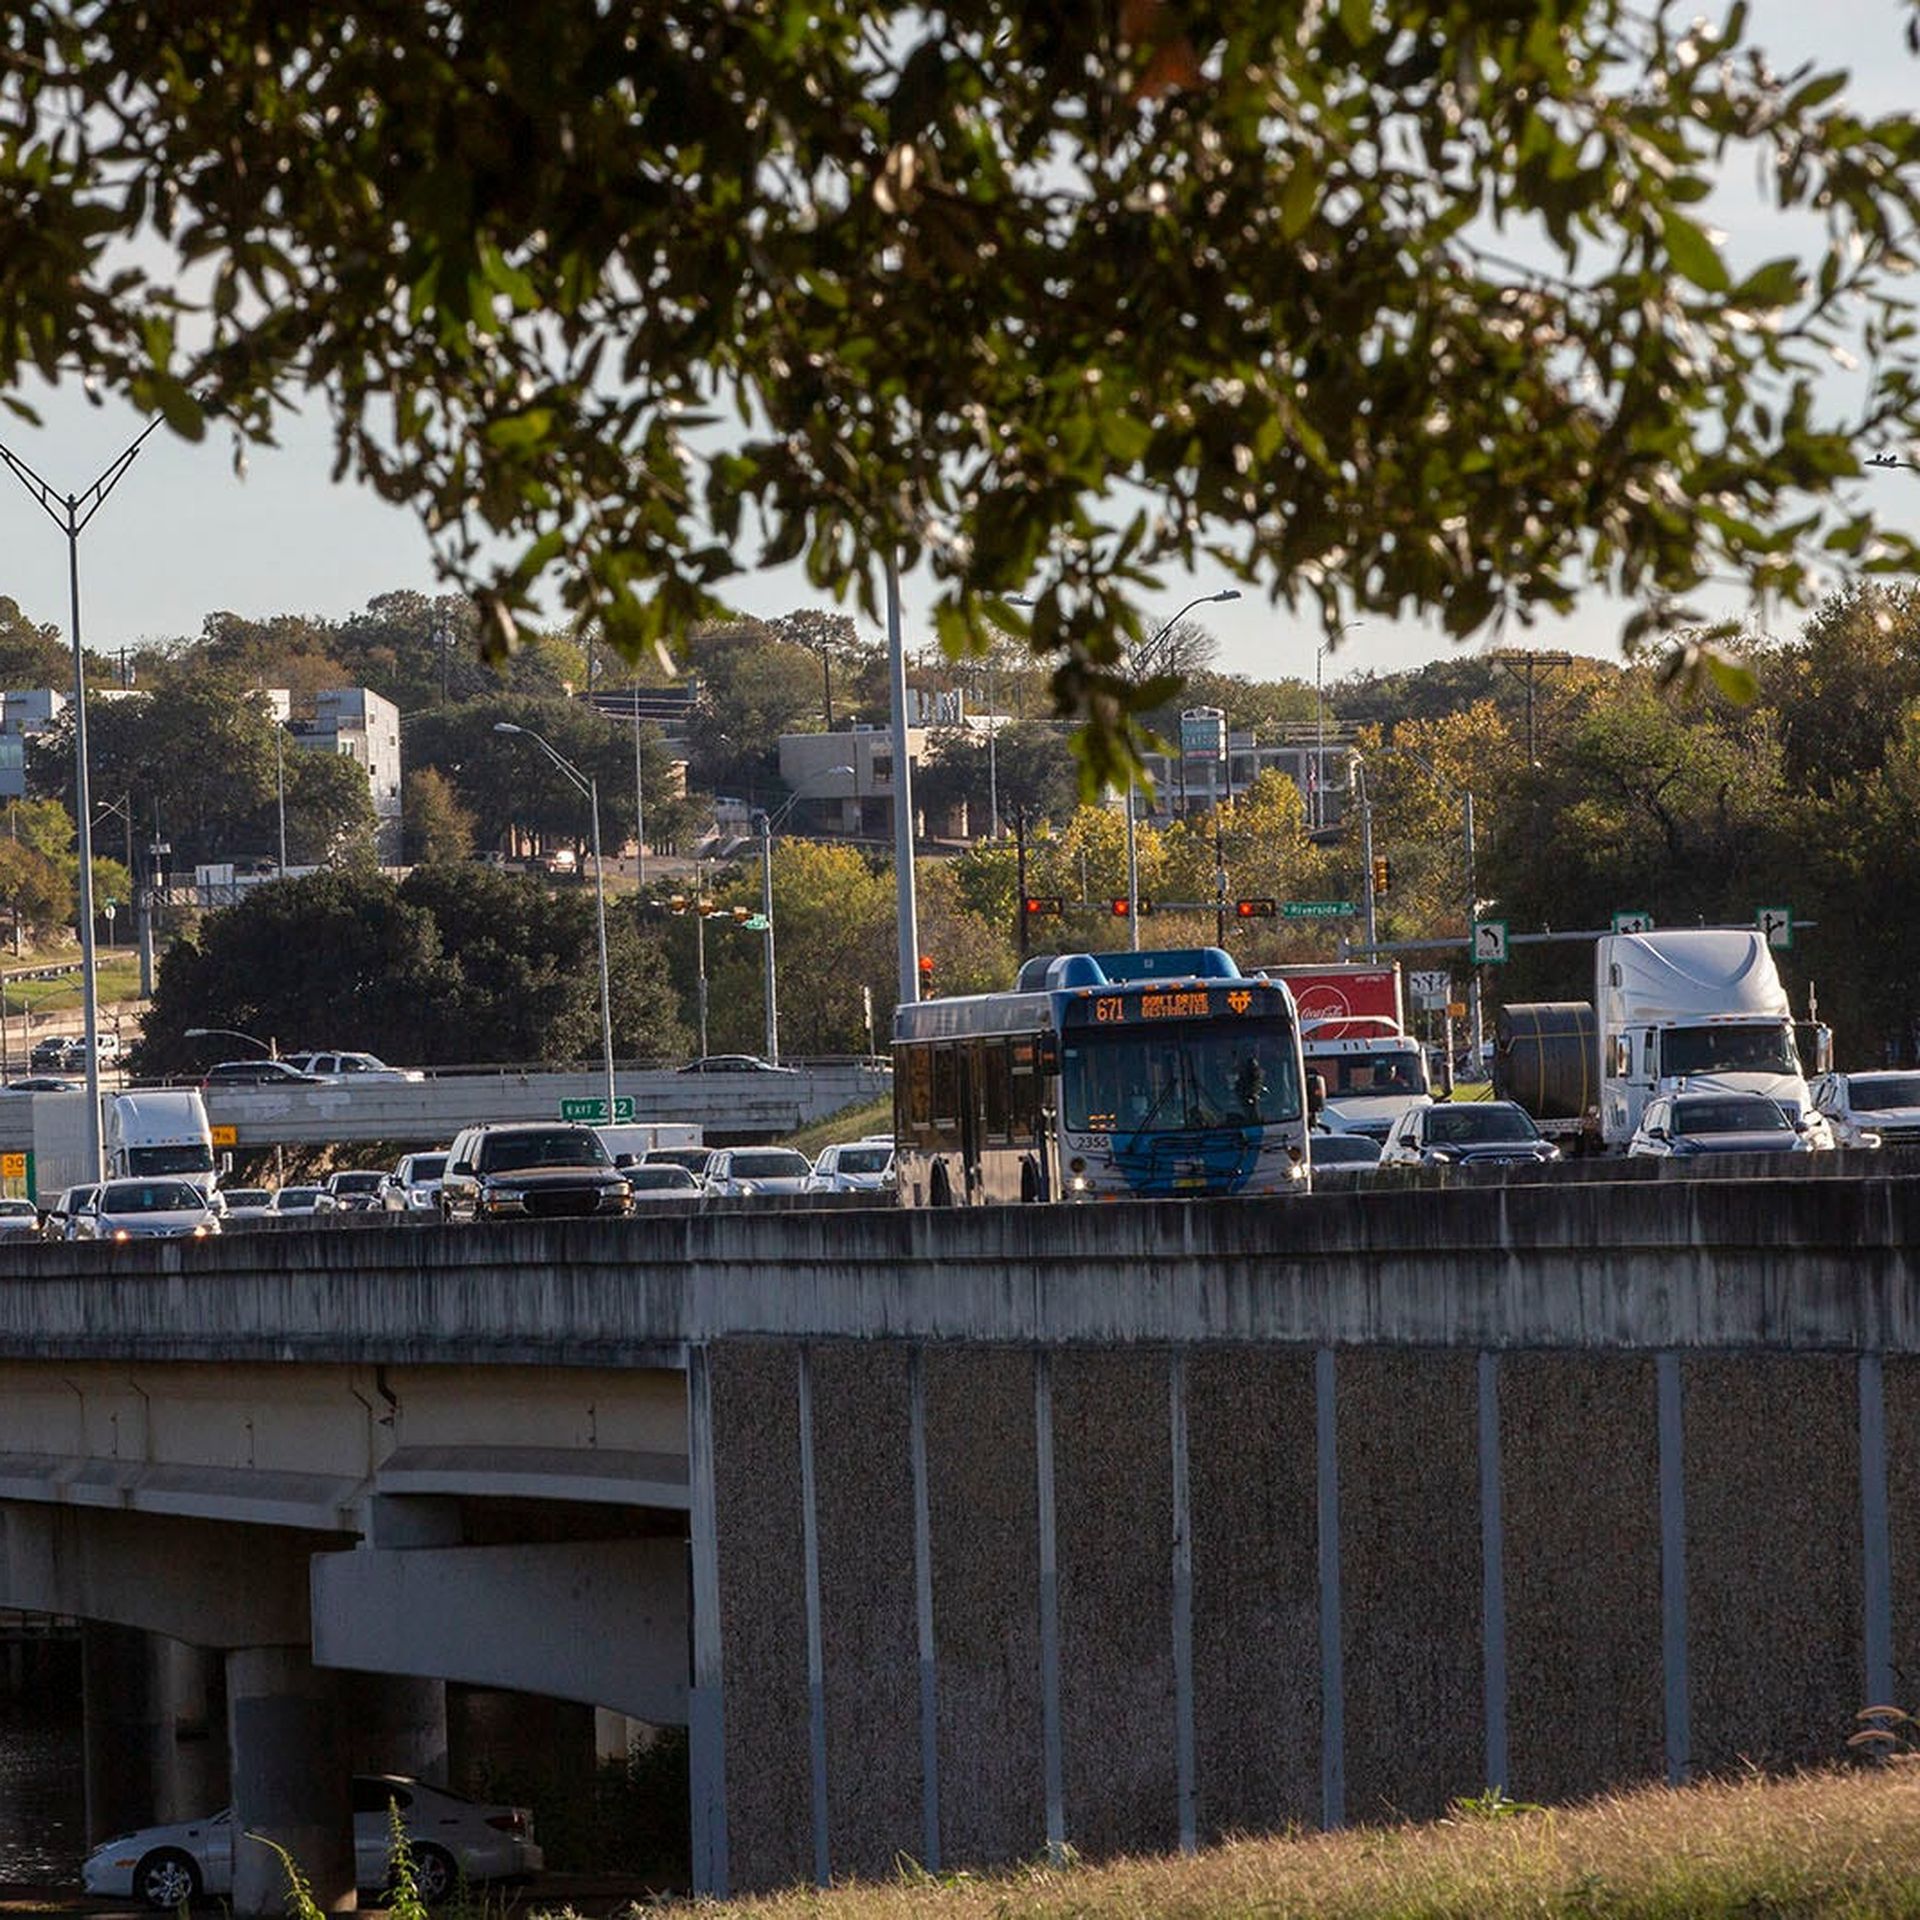 Traffic on I-35 in downtown Austin.